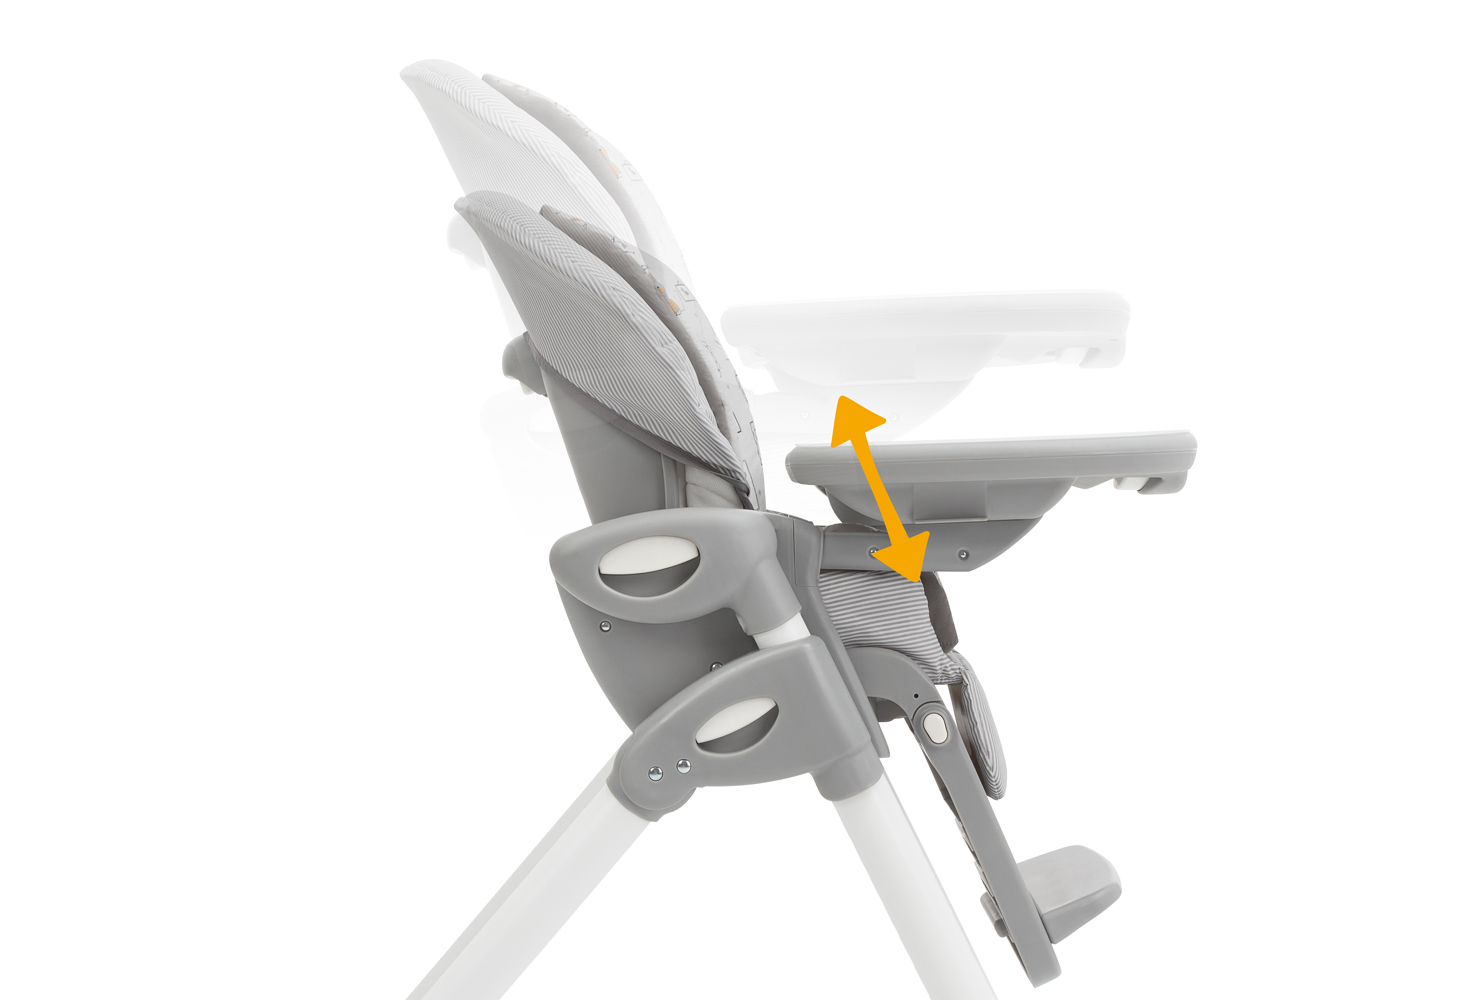  Profile image of the Mimzy REcline highchair ghosted to show the height adjustment options, with a double ended orange arrow overlaid on the seat.